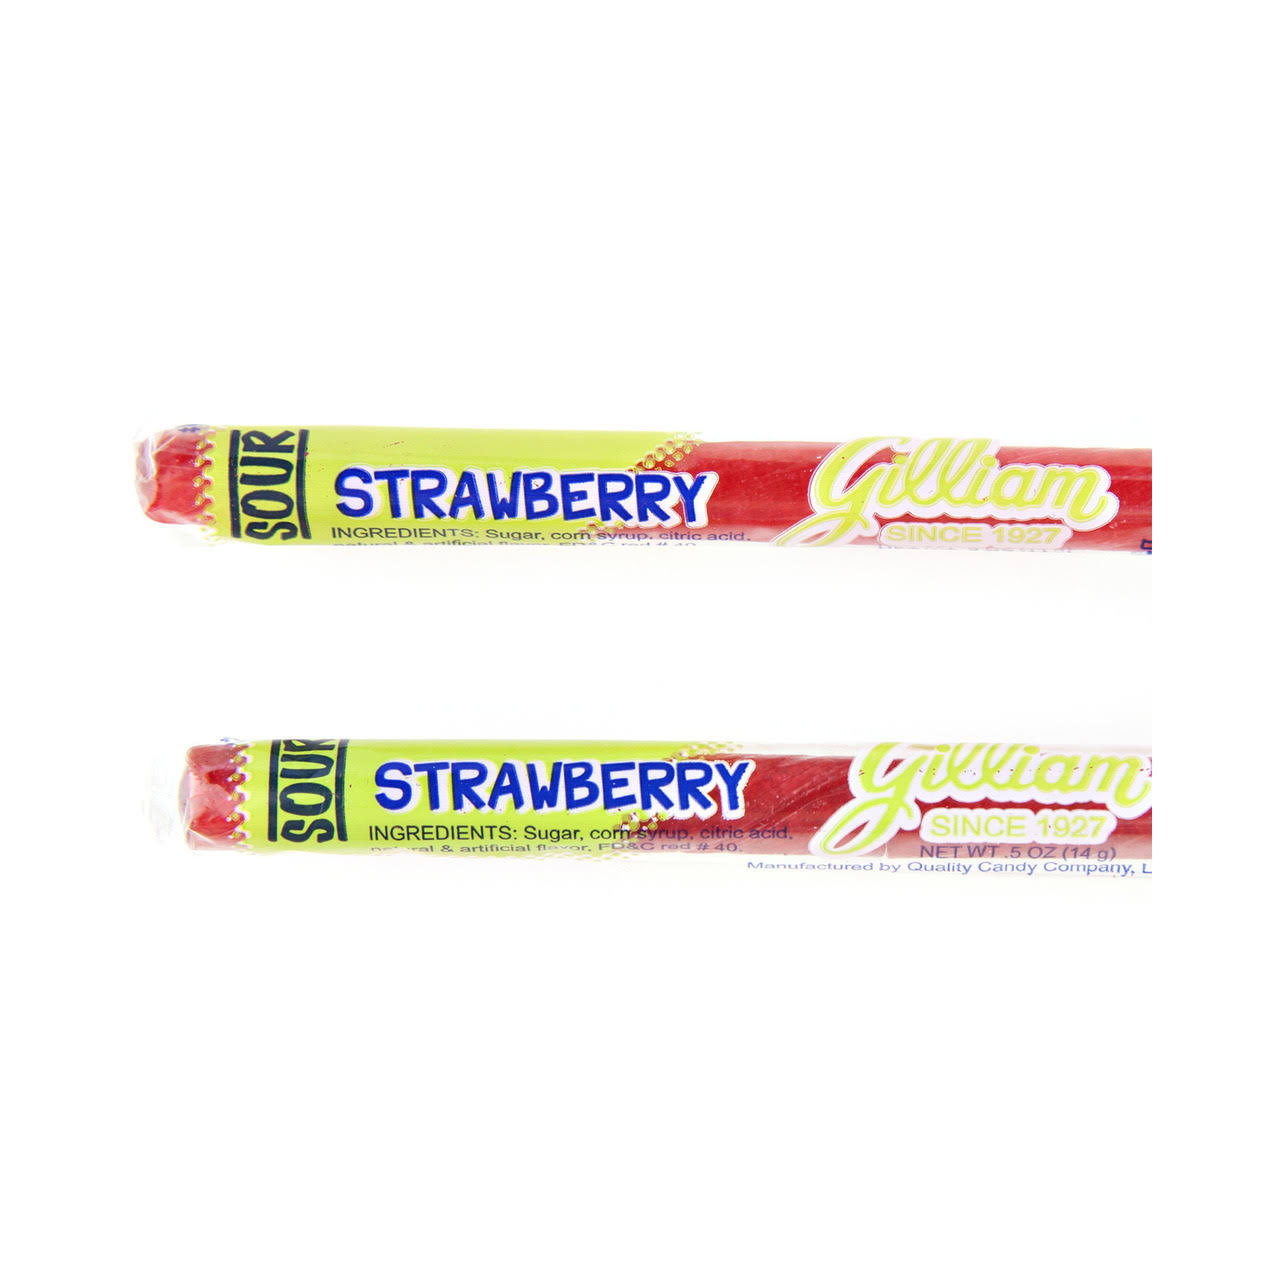 Gilliam Old Fashioned Candy Sticks Sour Strawberry 80ct Box